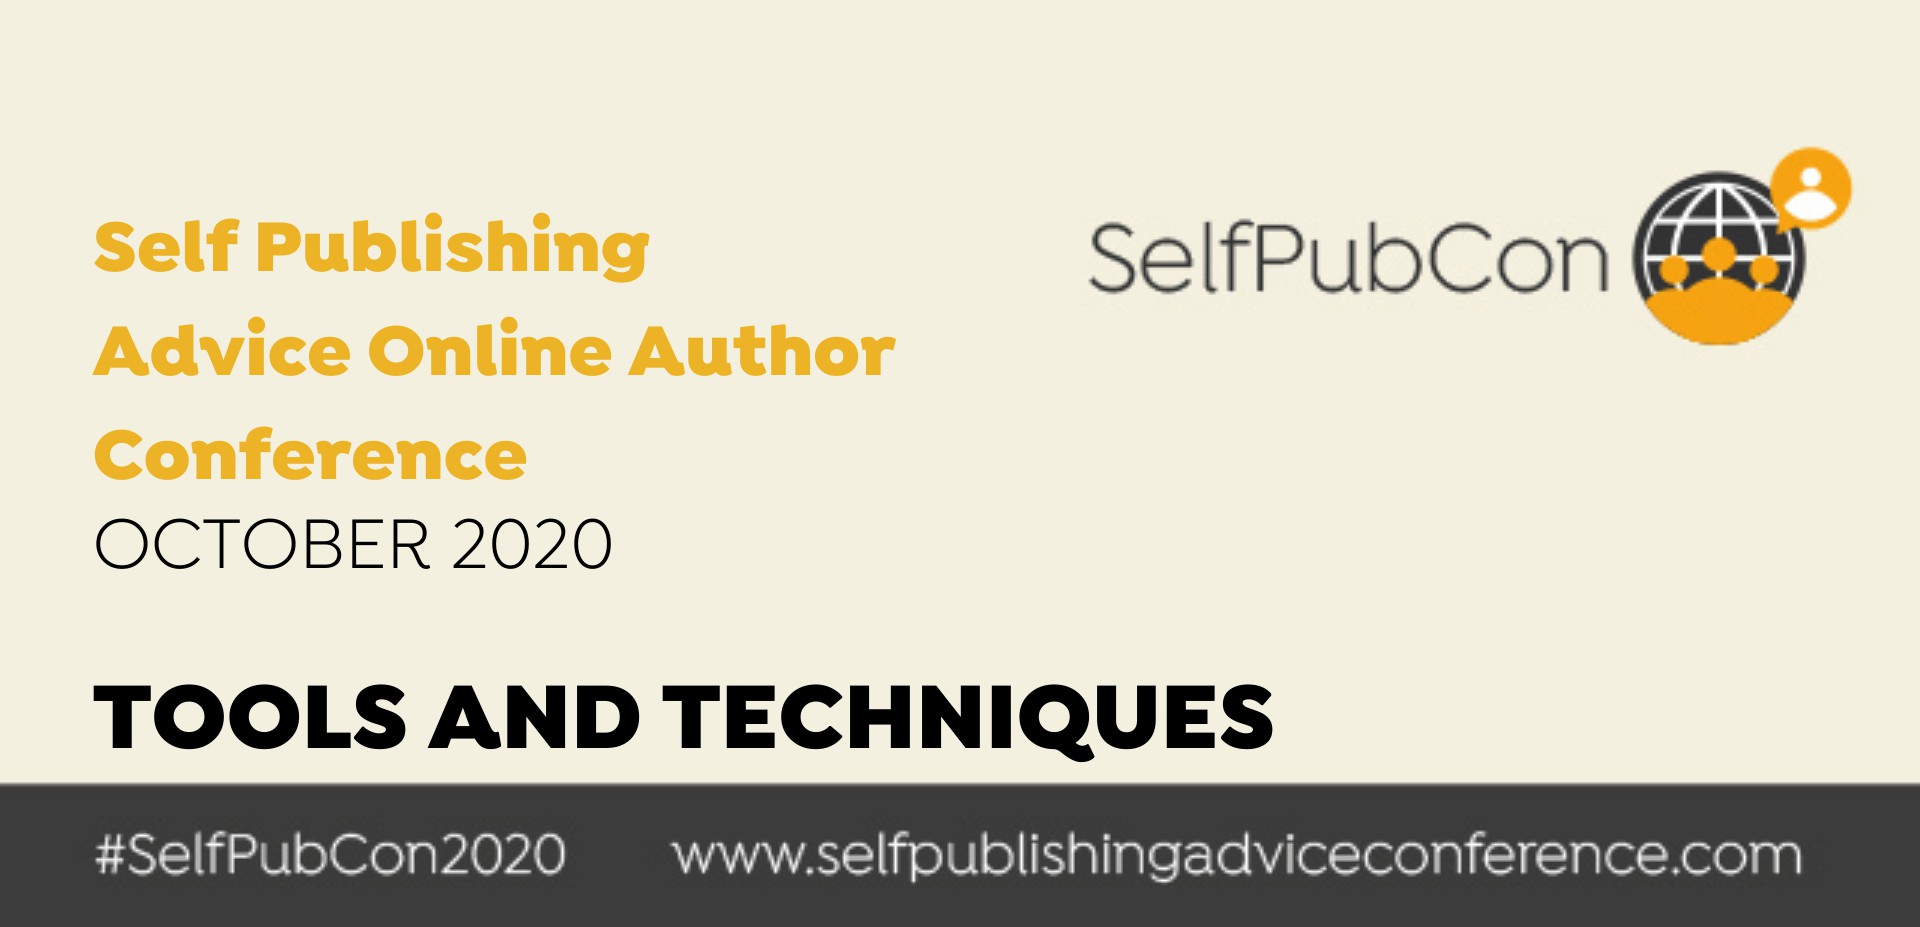 Attend Our Upcoming Self-Publishing Advice Conference Free On October 17th